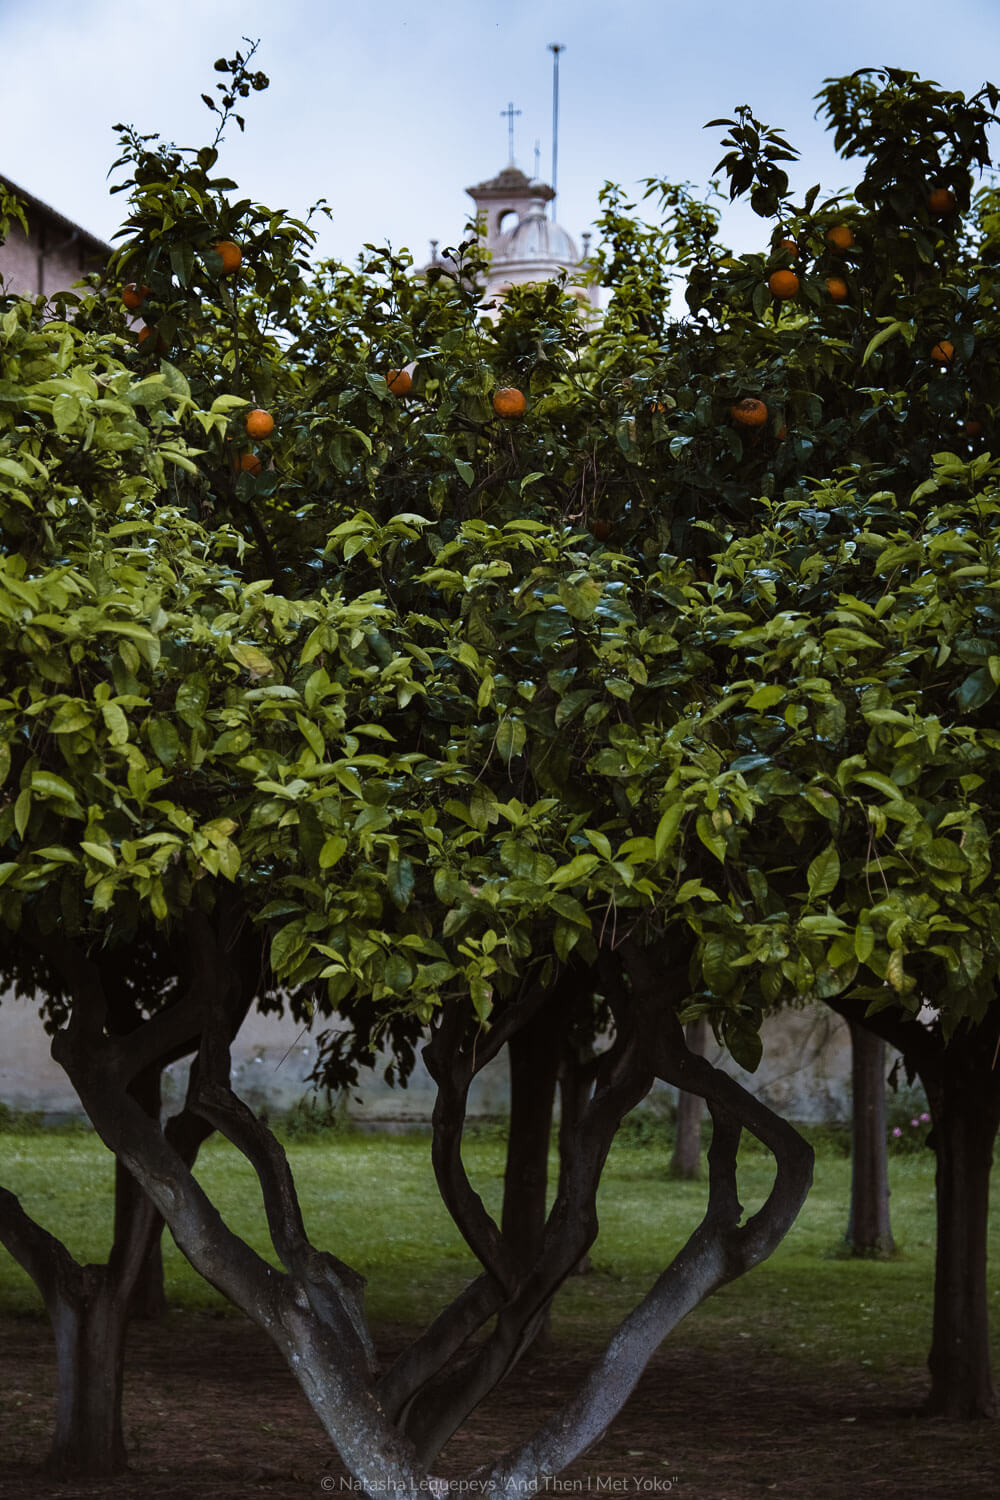 Orange trees in the Orange Garden in Rome, Italy. Travel photography and guide by © Natasha Lequepeys for "And Then I Met Yoko". #rome #italy #travelblog #travelphotography